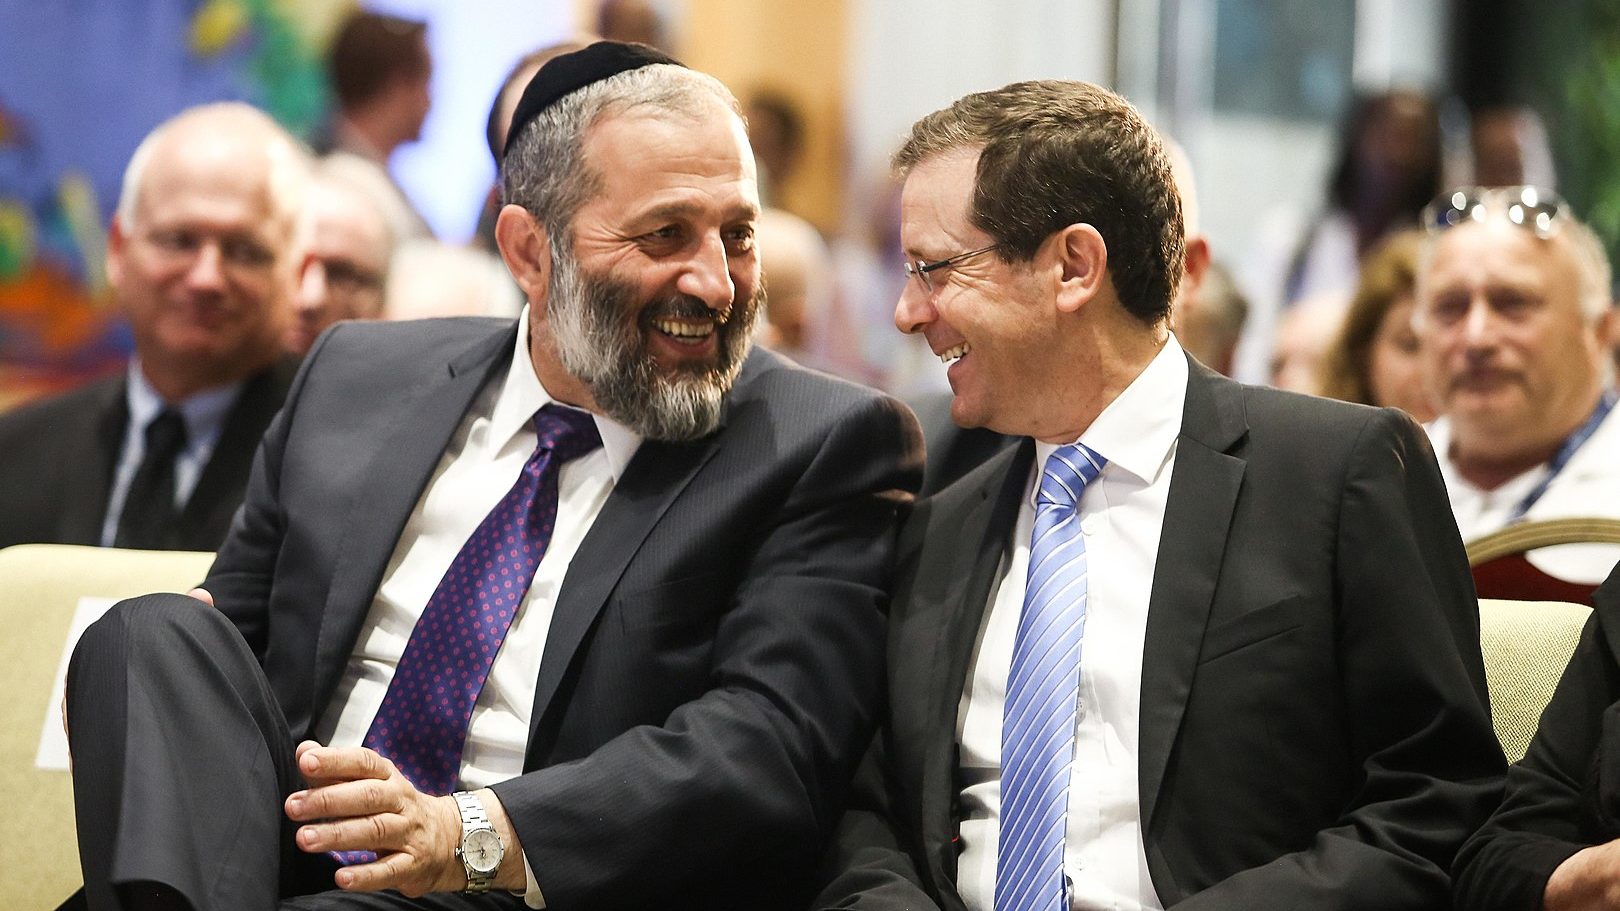 Shas Party Head Aryeh Deri To Resign From Knesset Under Plea Deal